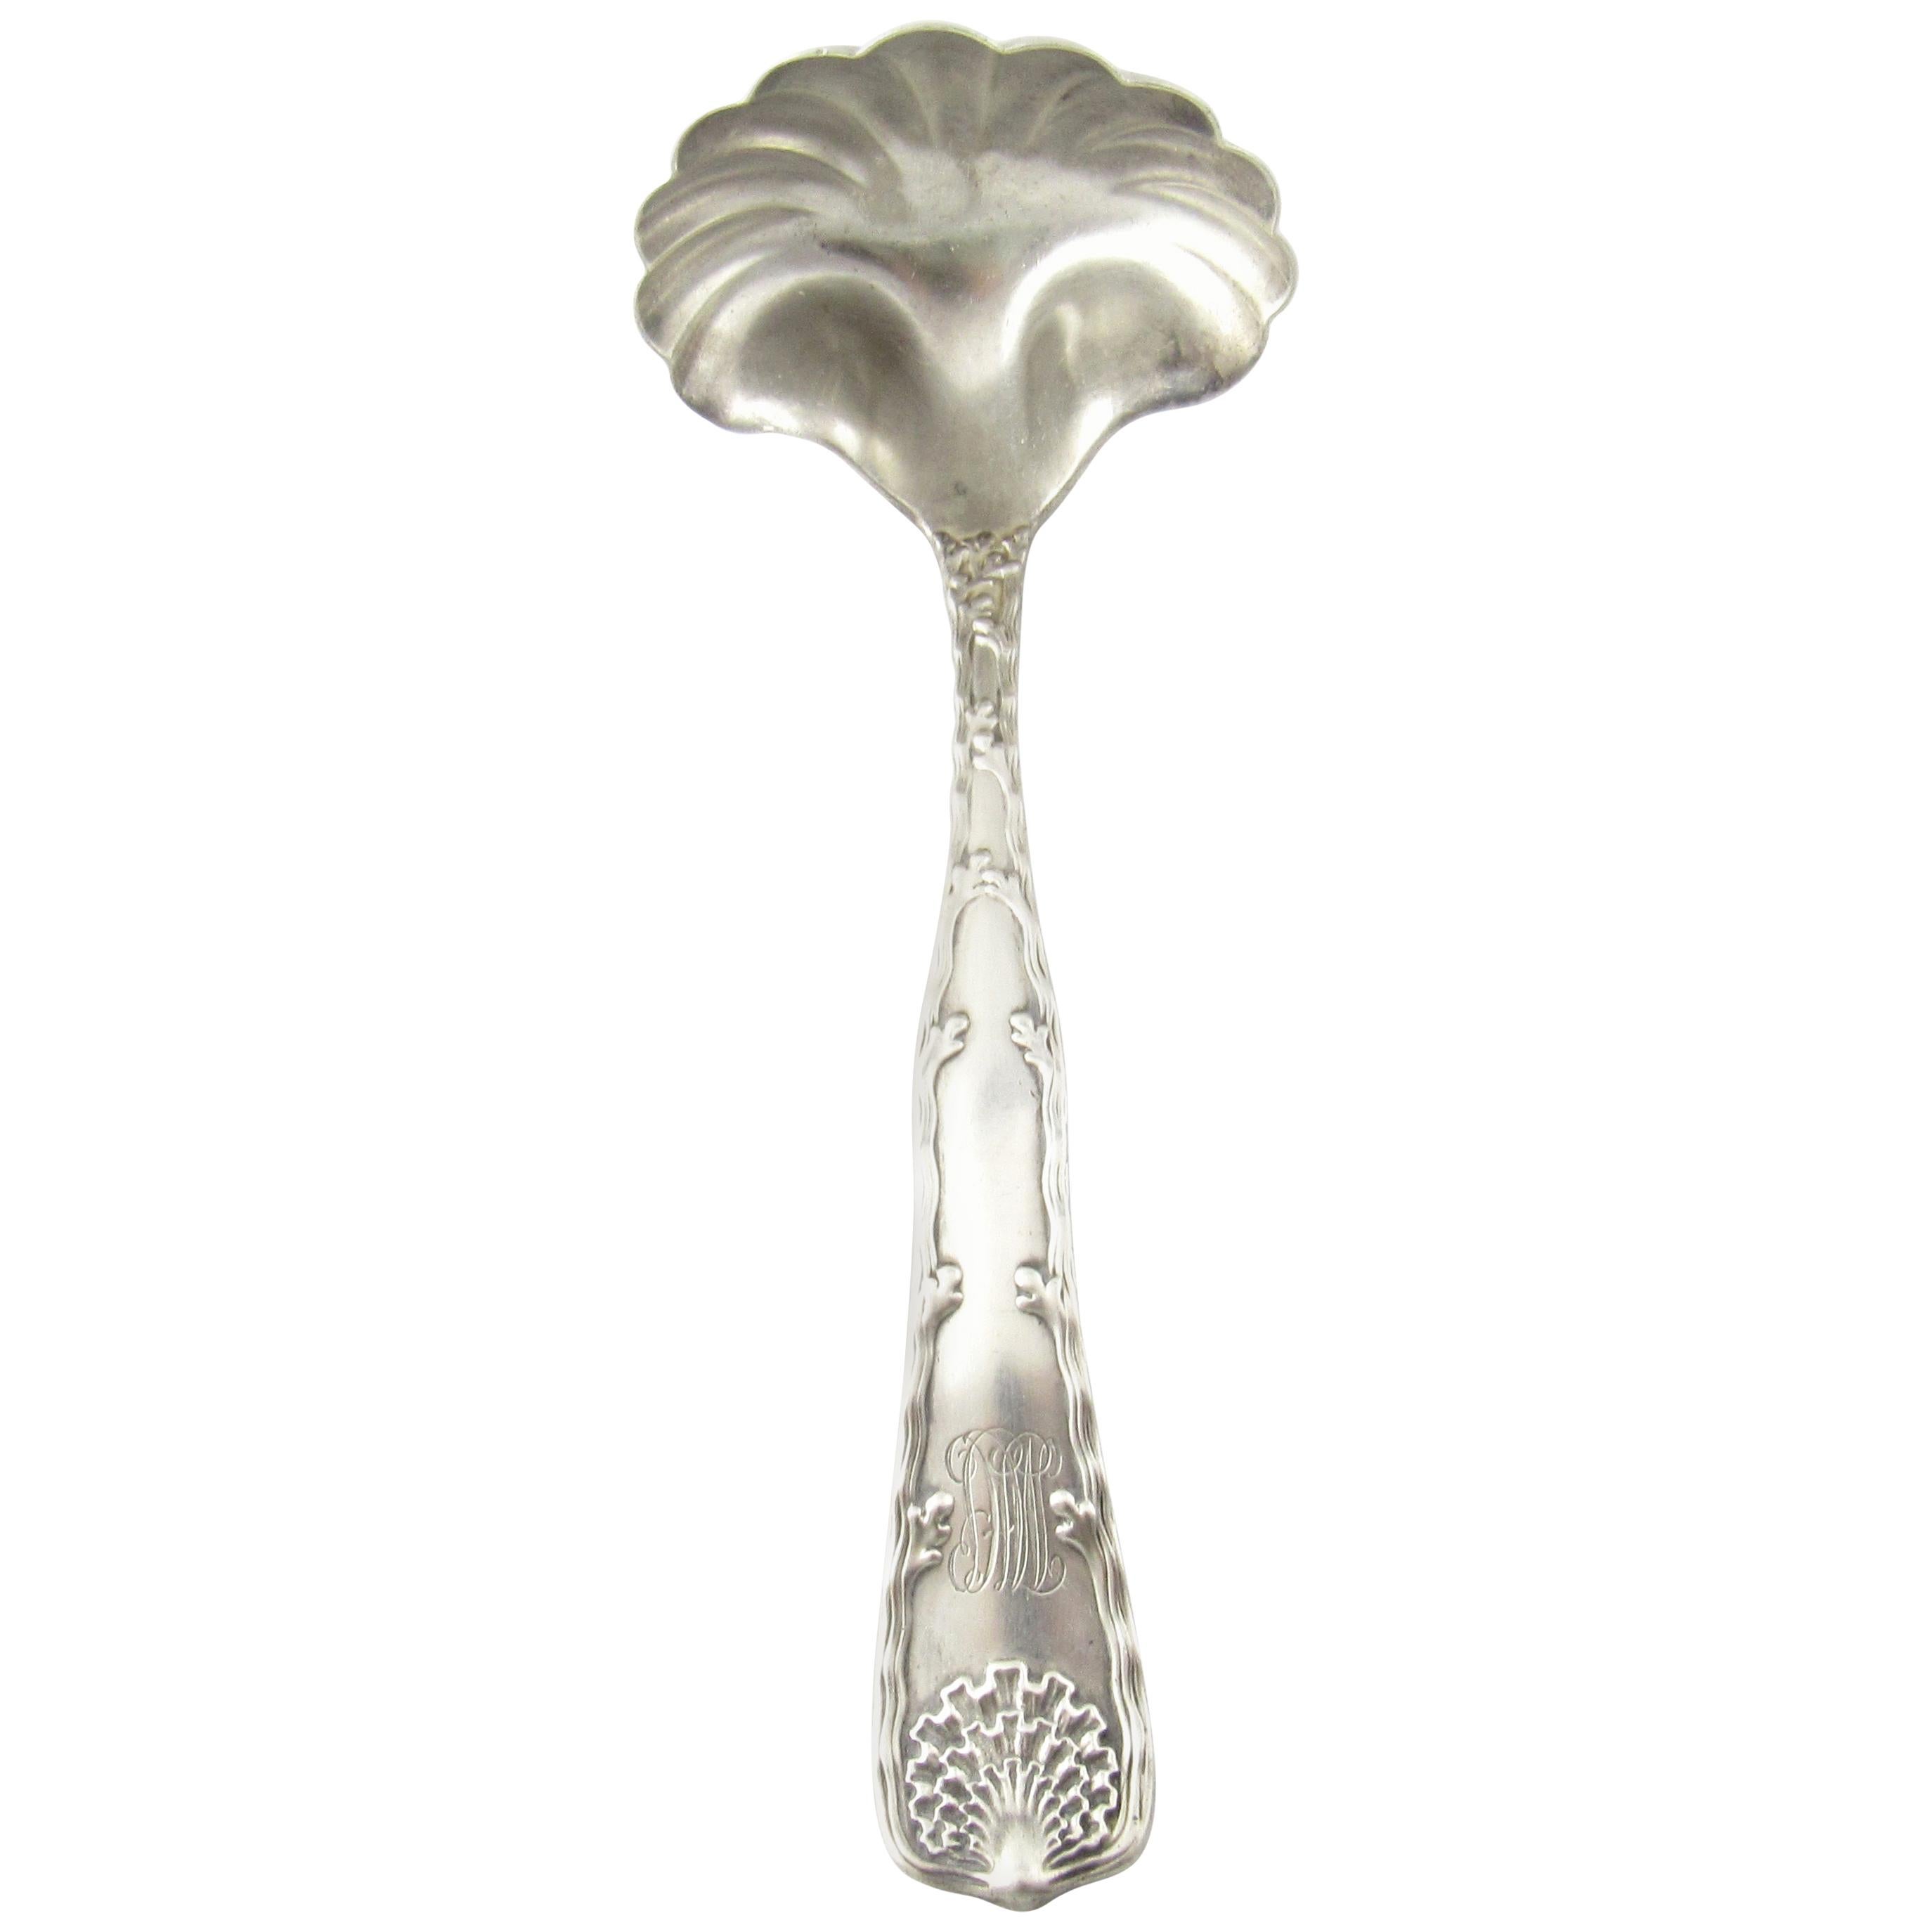 Tiffany & Co. Wave Edge Sterling Silver Ladle with Monogram